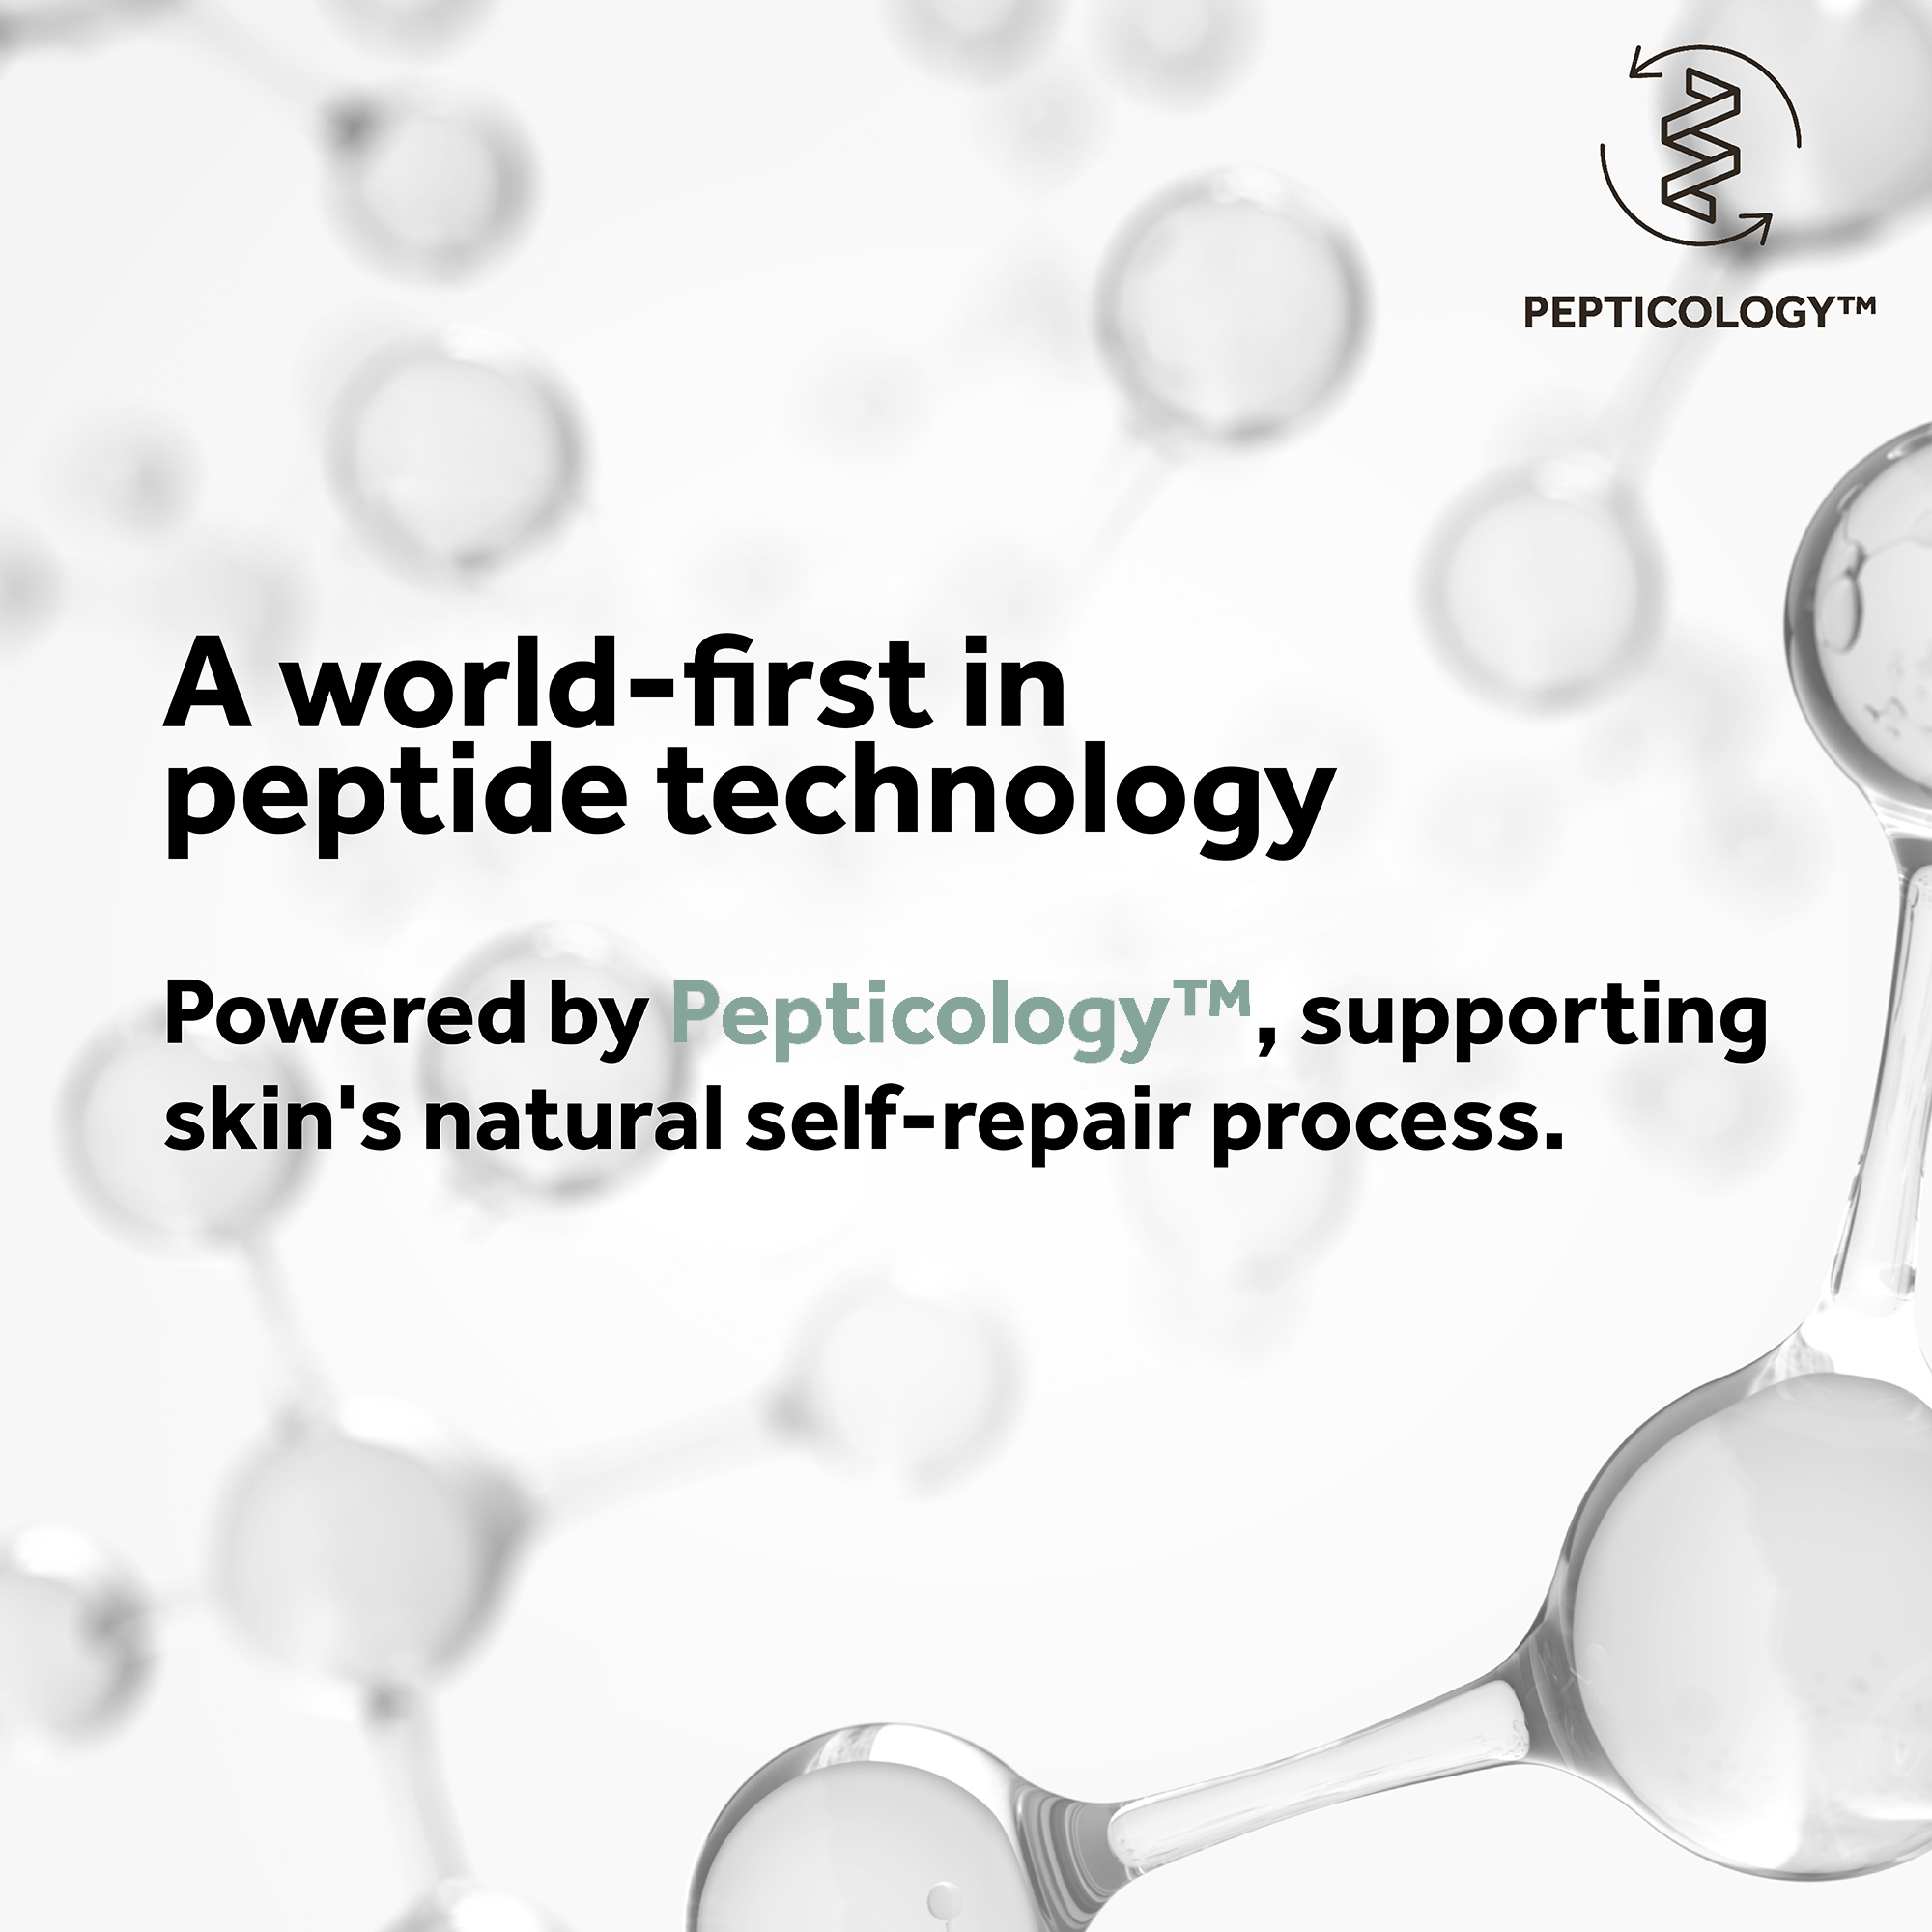  A world-first in peptide technology. Powered by pepticology, supporting skin's natural self-repair process